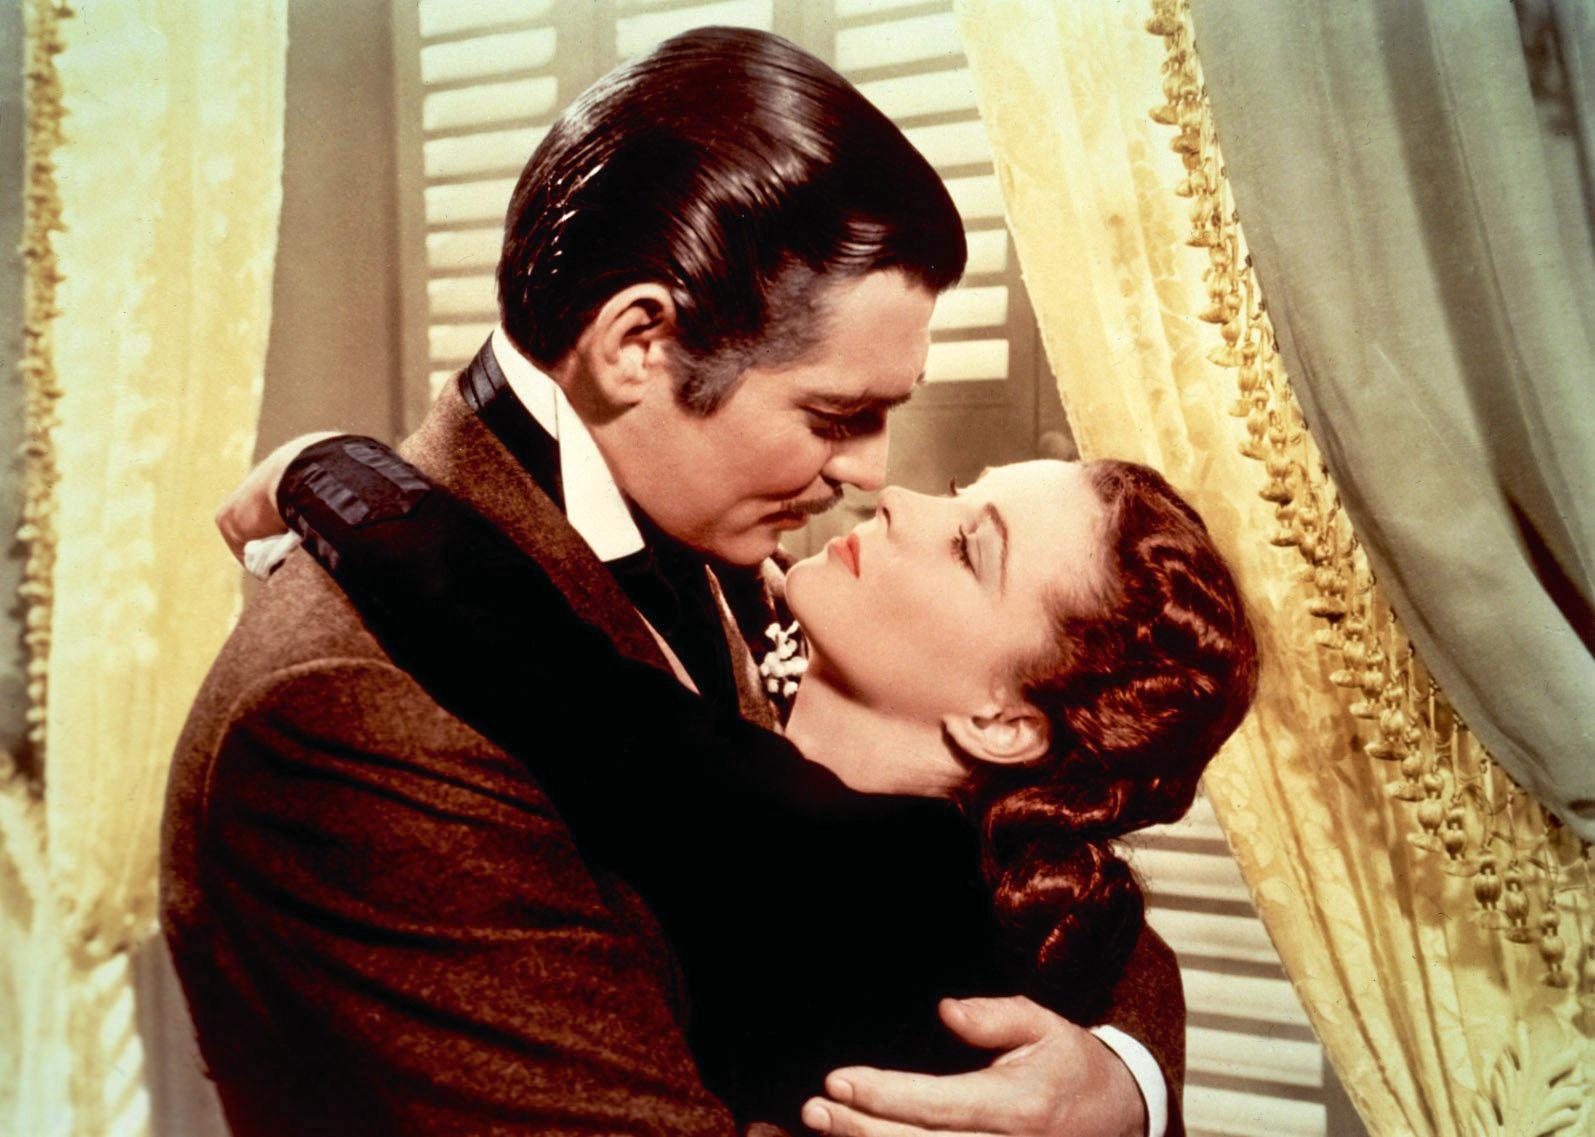 Gone With The Wind, starring Clark Gable and Vivien Leigh